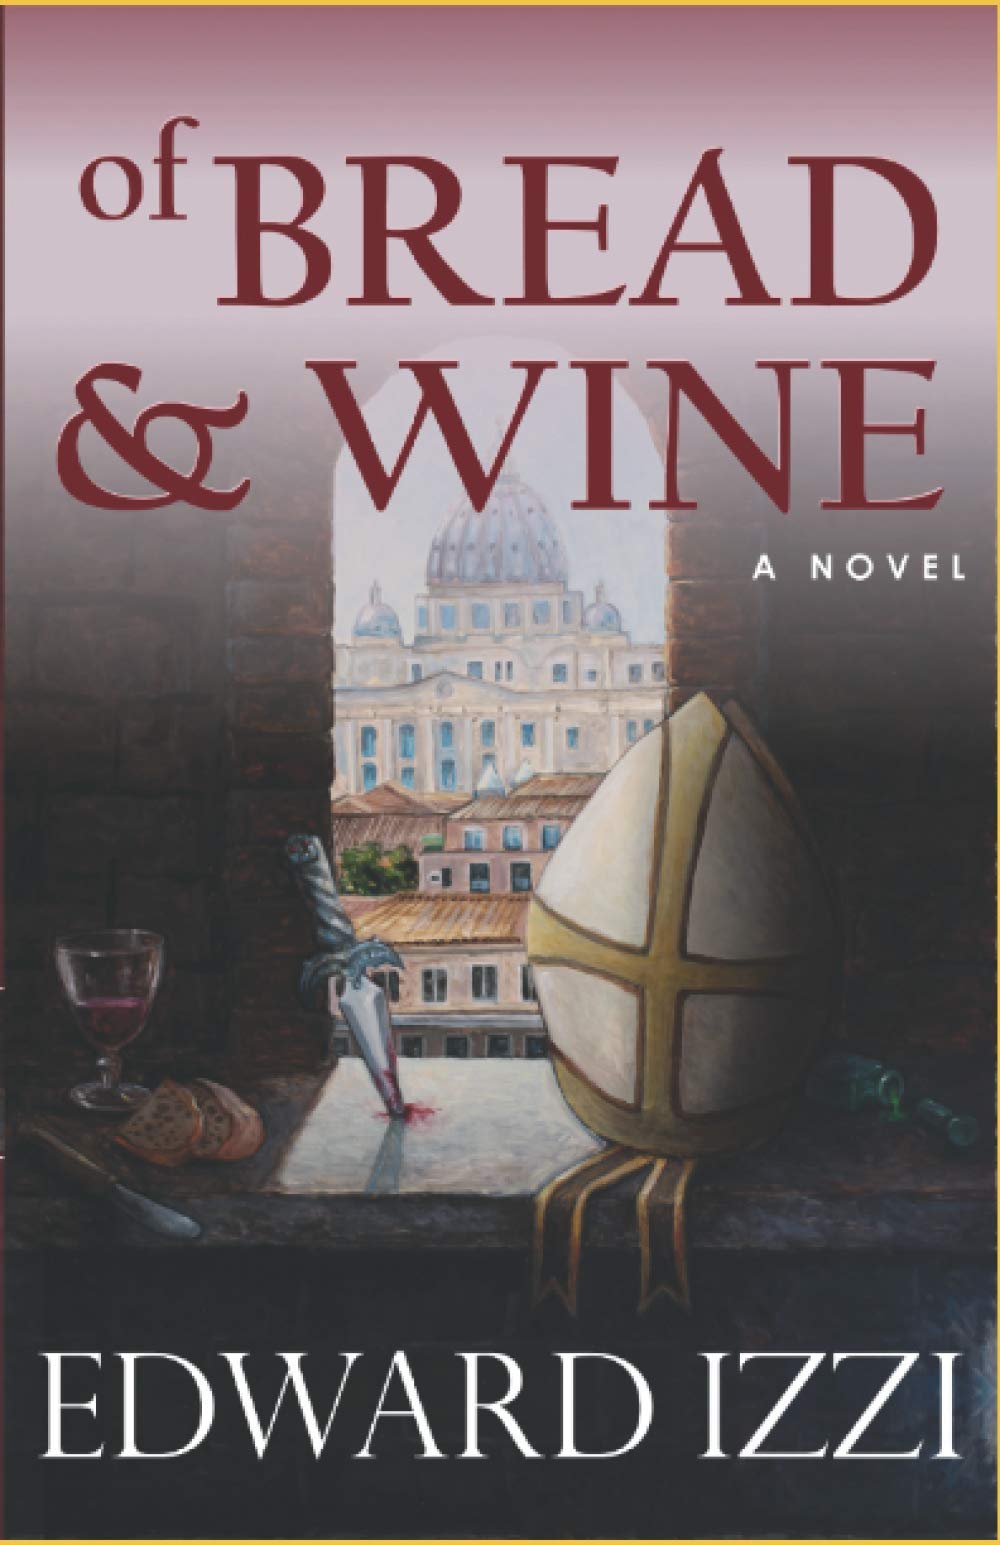 Of Bread And Wine.jpg